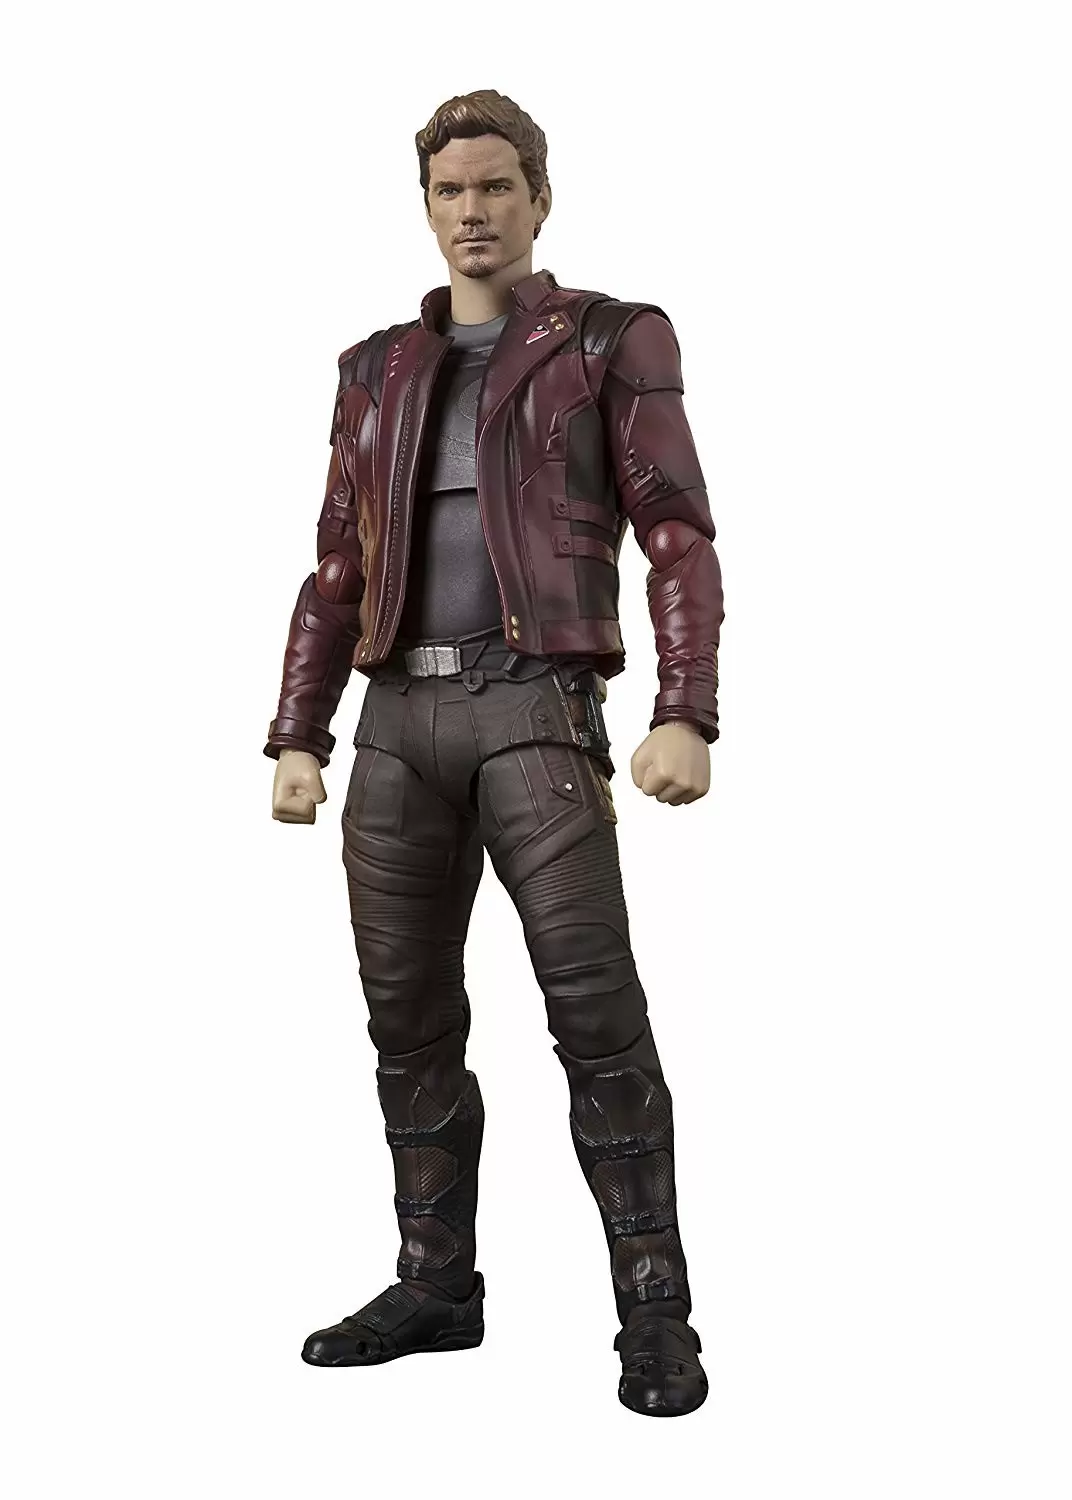 S.H. Figuarts Marvel - Star Lord